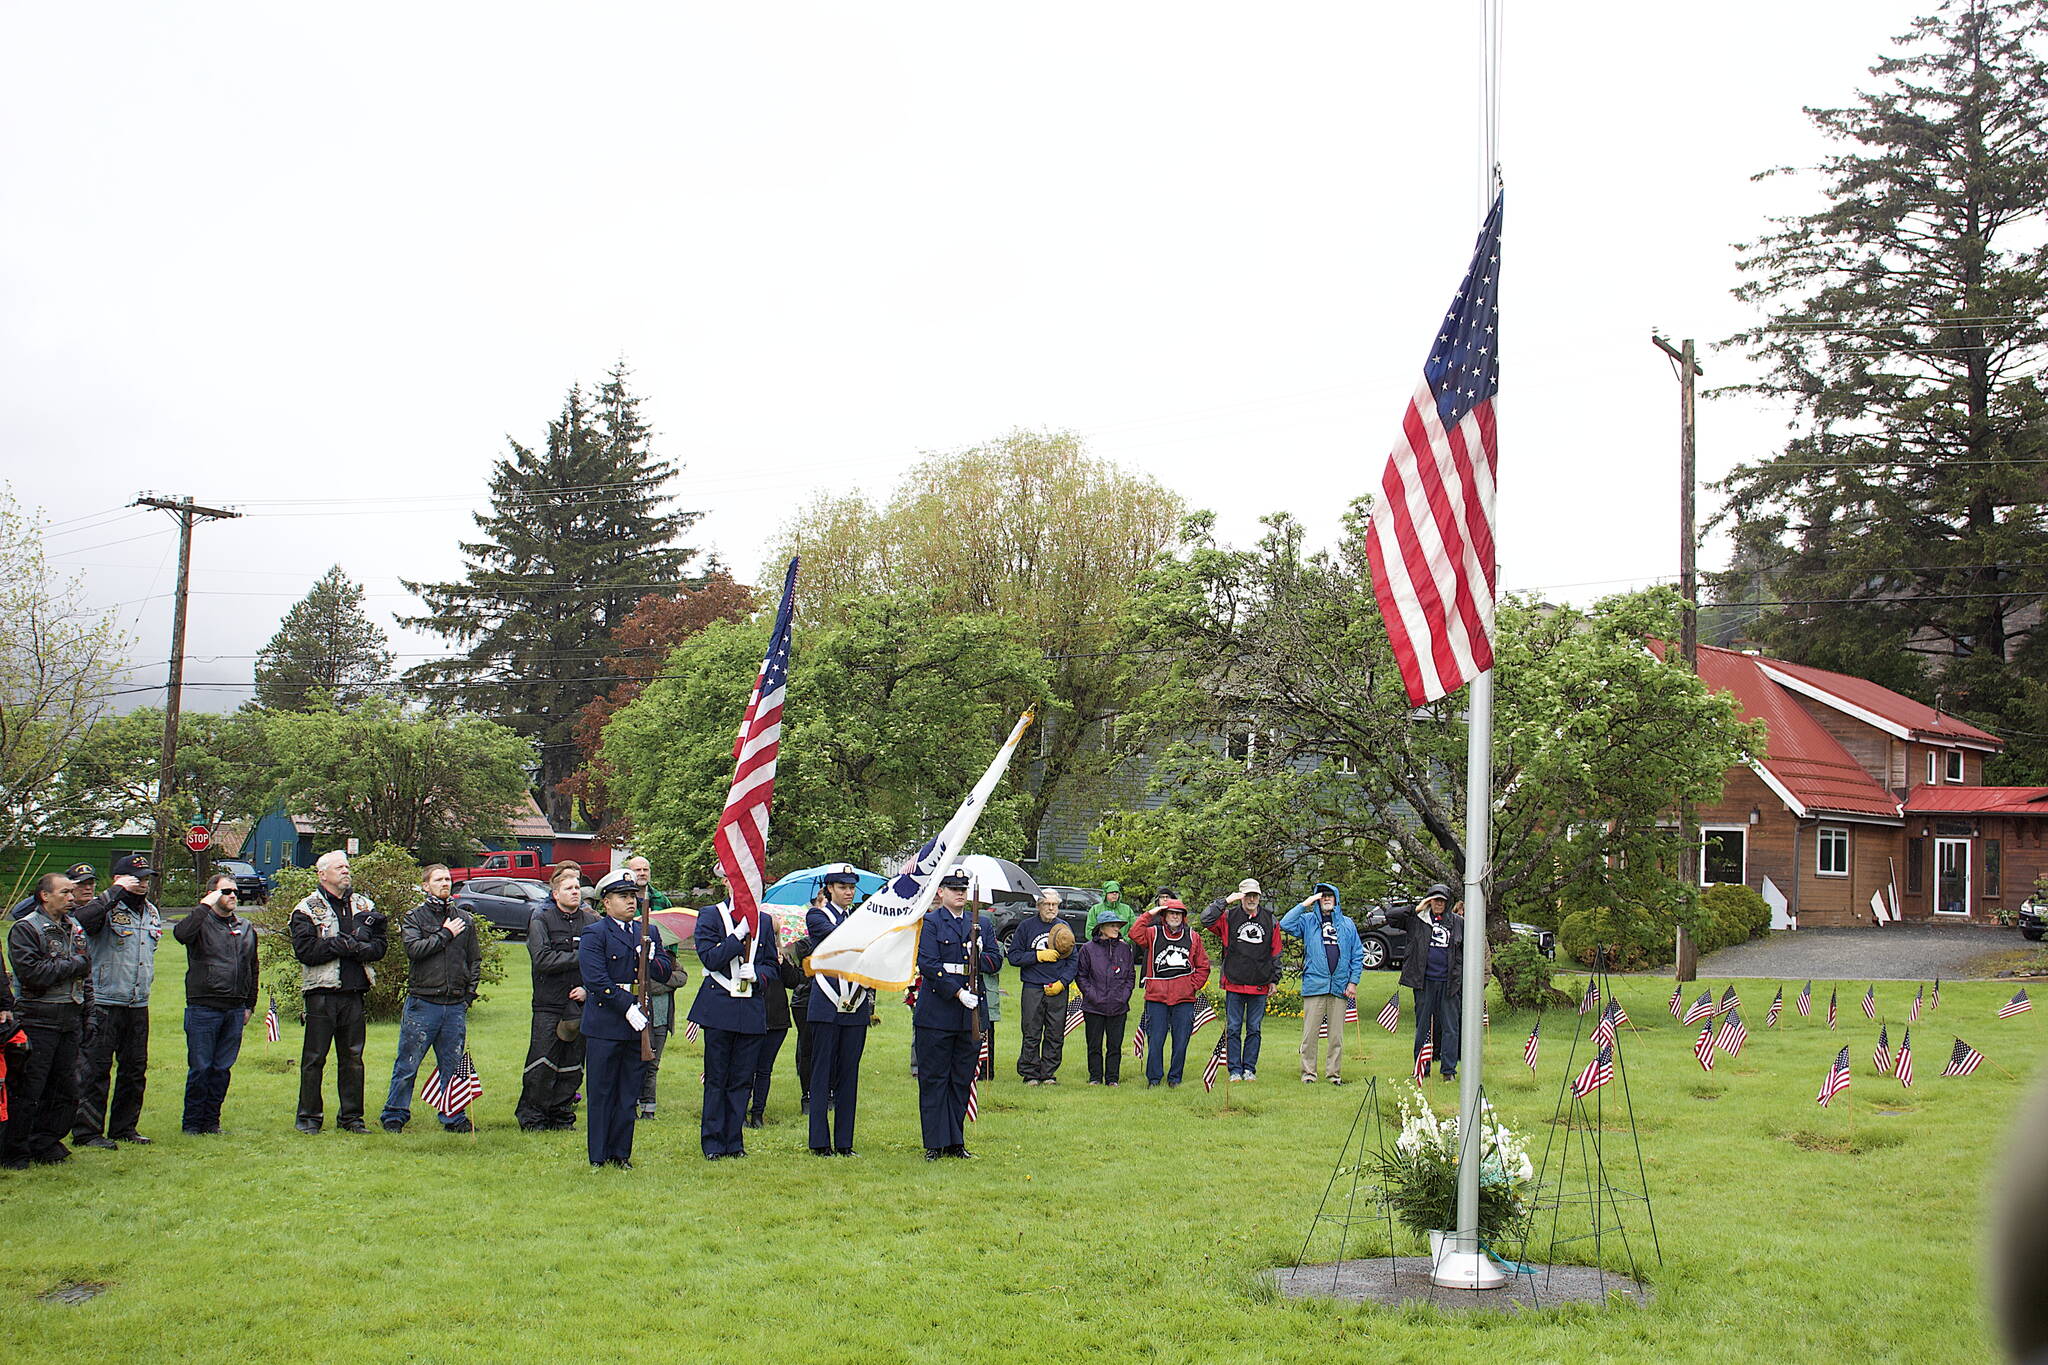 About 60 veterans, their families and other supporters gather at Evergreen Cemetery for a Memorial Day observance Monday. (Mark Sabbatini / Juneau Empire)